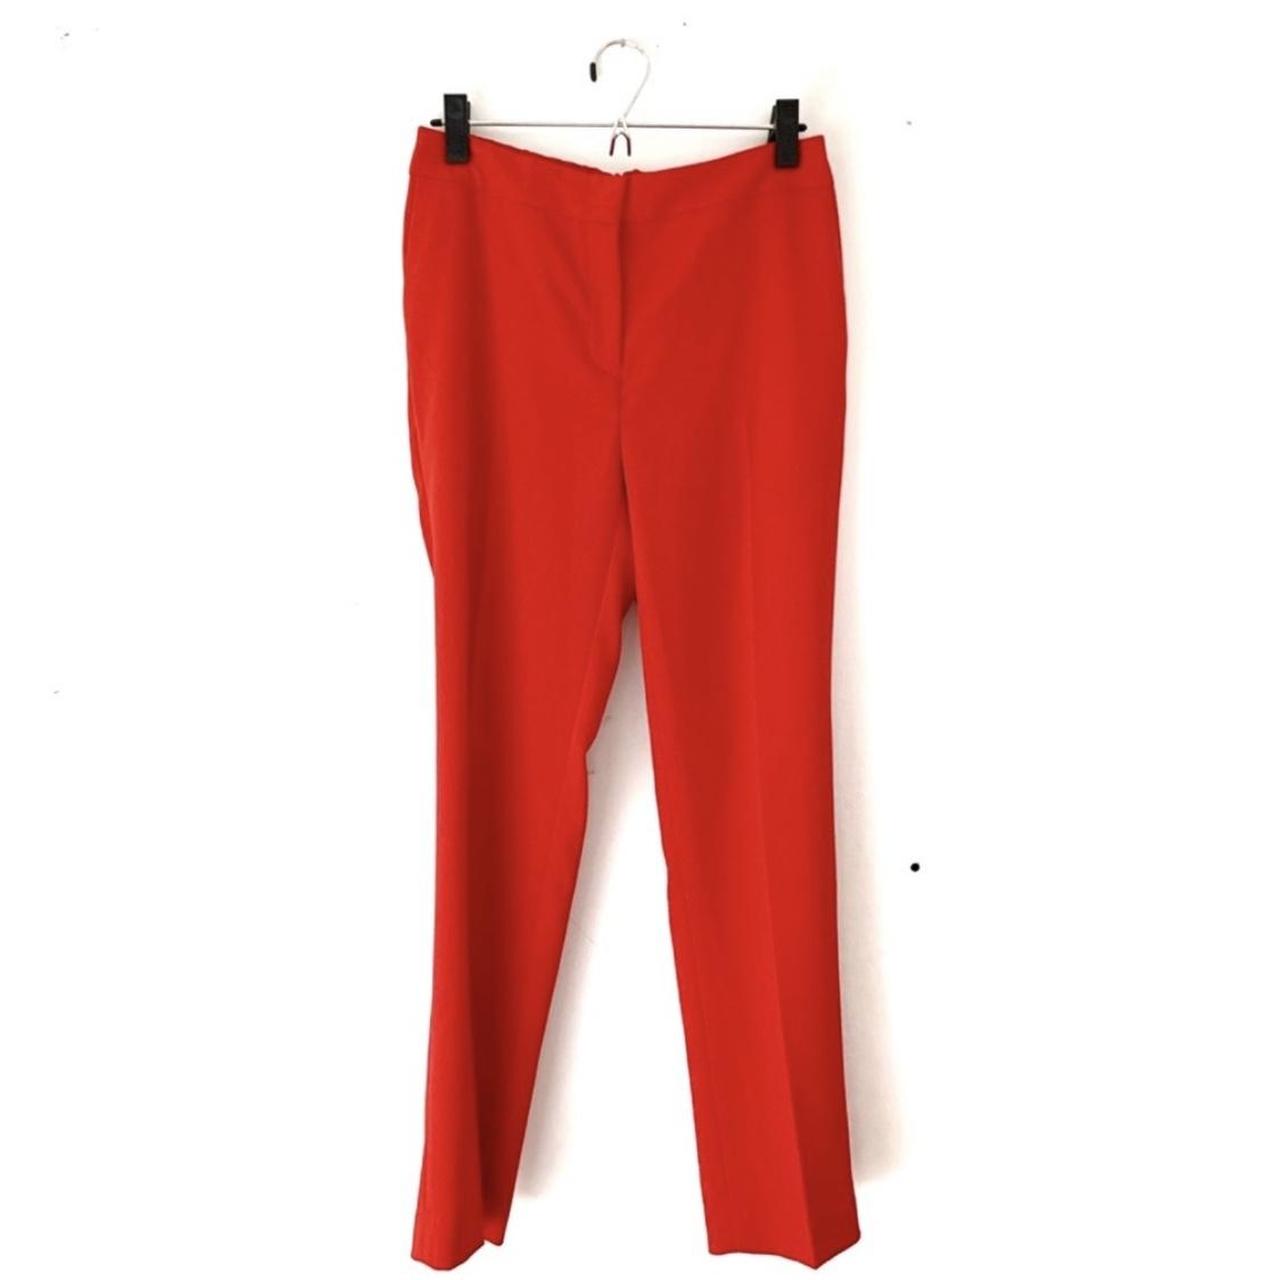 Buy NTX Women Cotton Flex Ankle Length Trouser Pants (Bright Red) at  Amazon.in